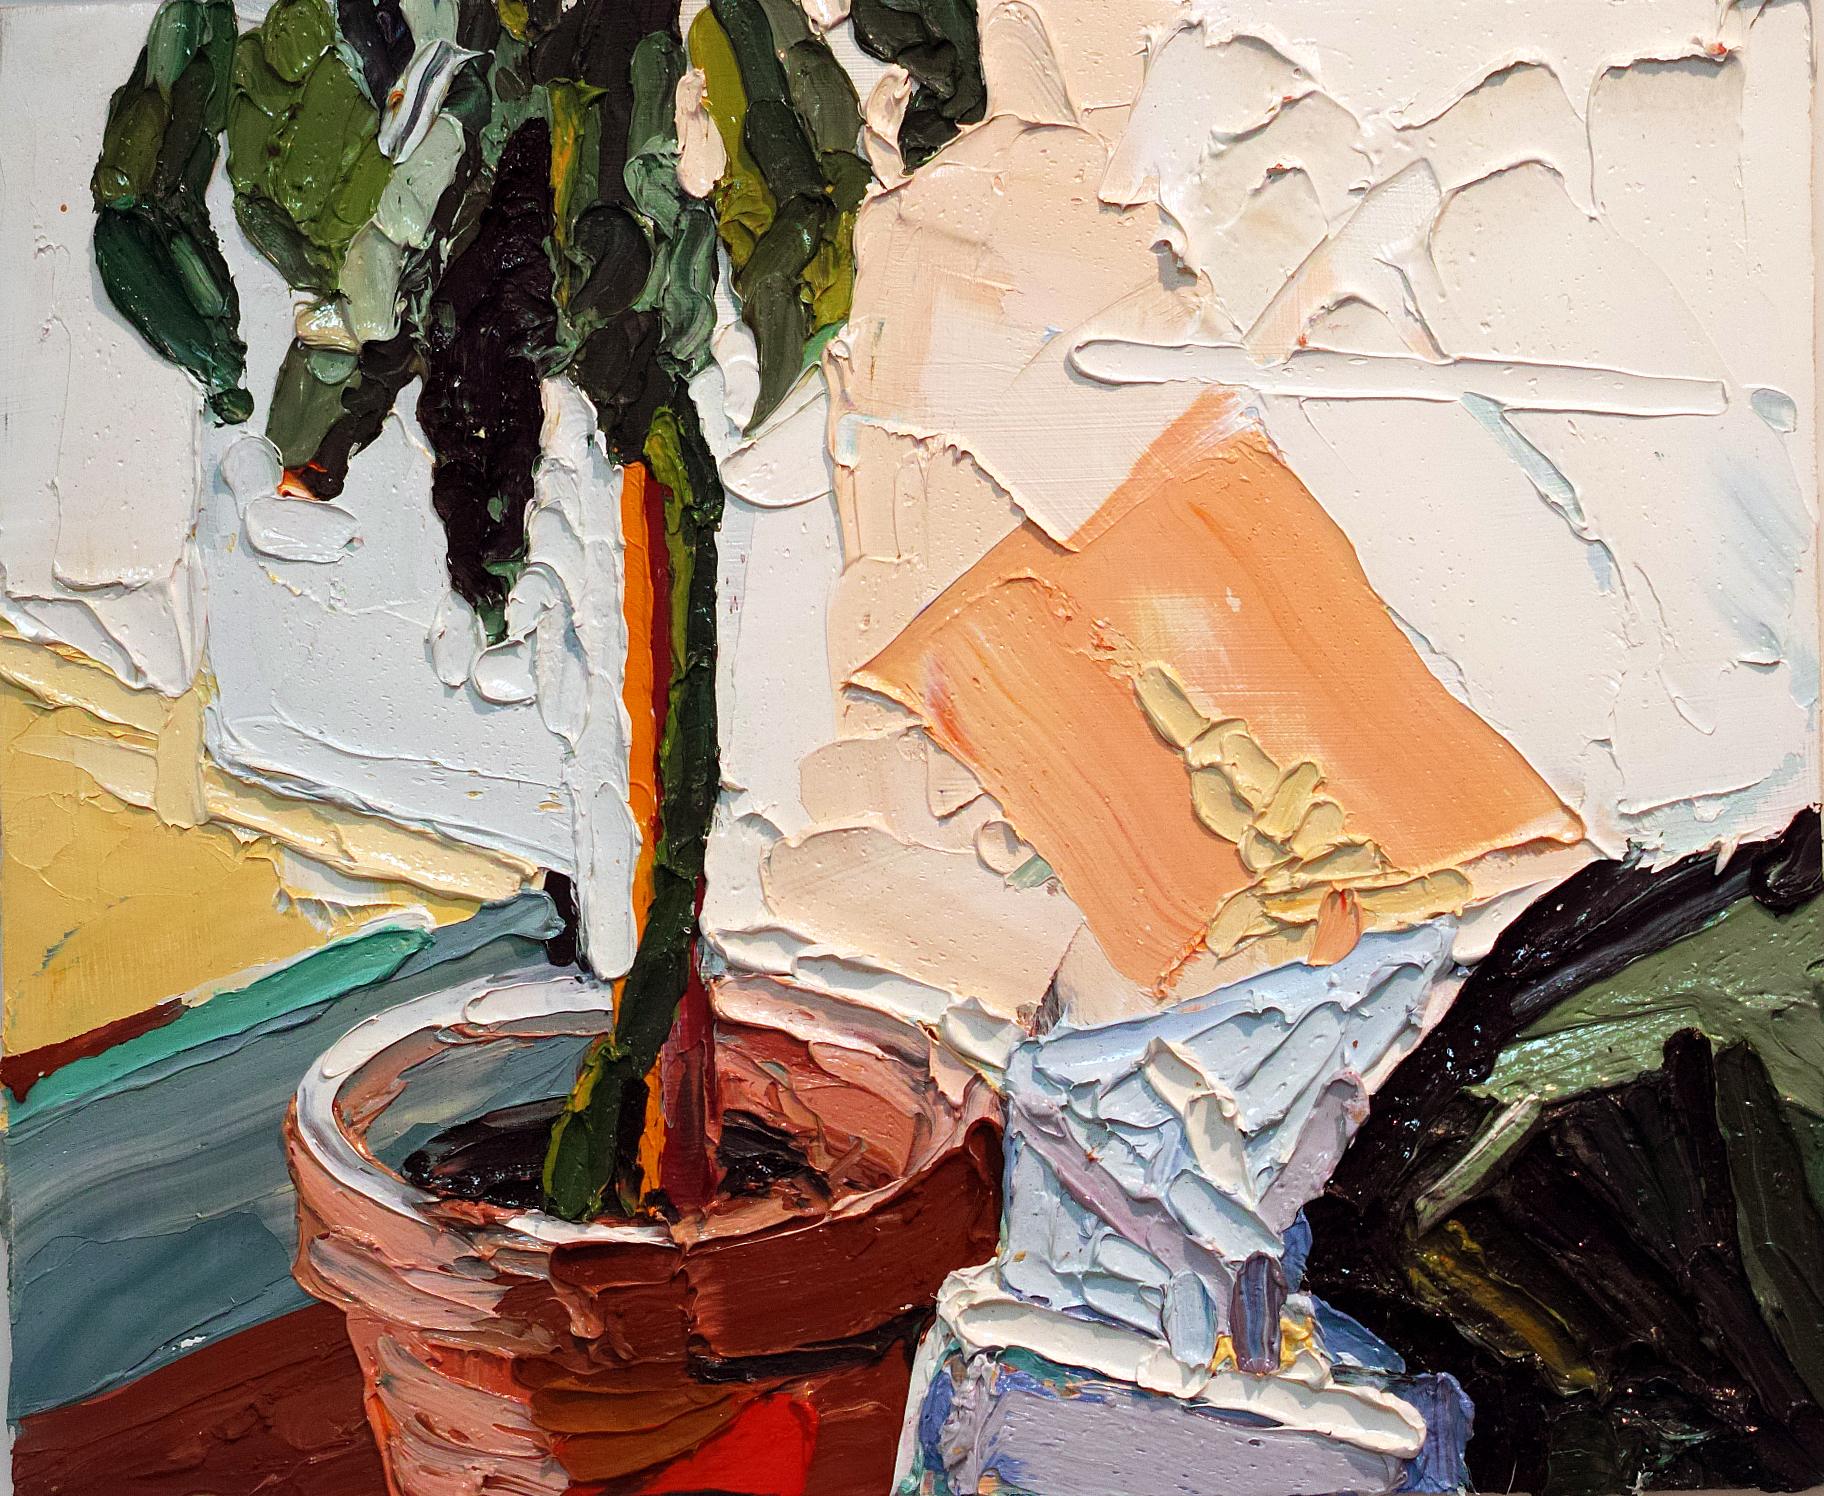 Studio Plant, 1992, oil on plywood, 10 x 12 inches